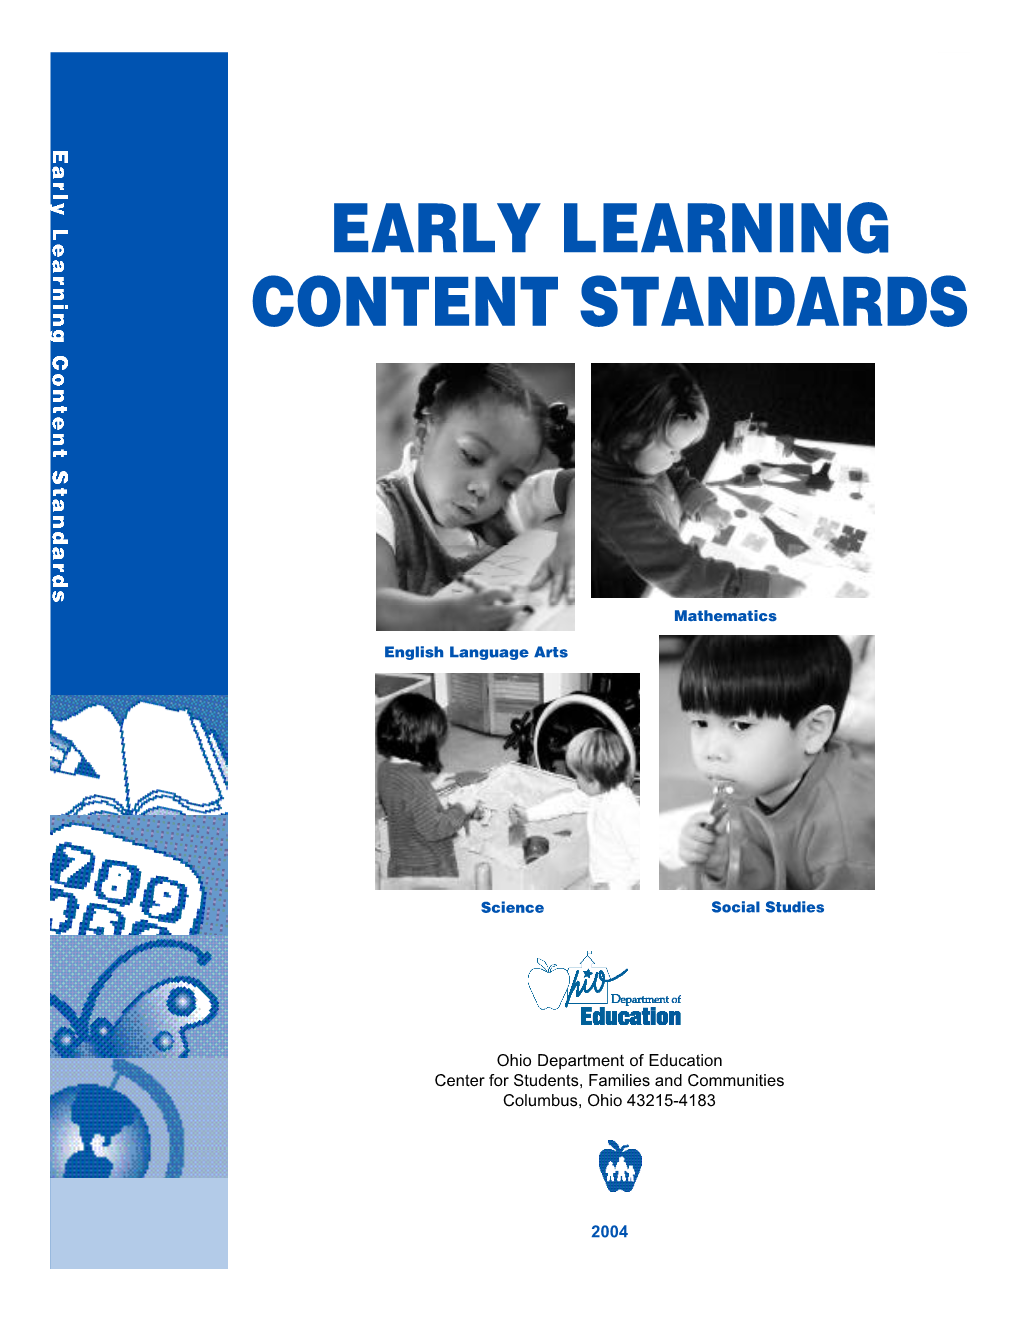 Early Learning Content Standards